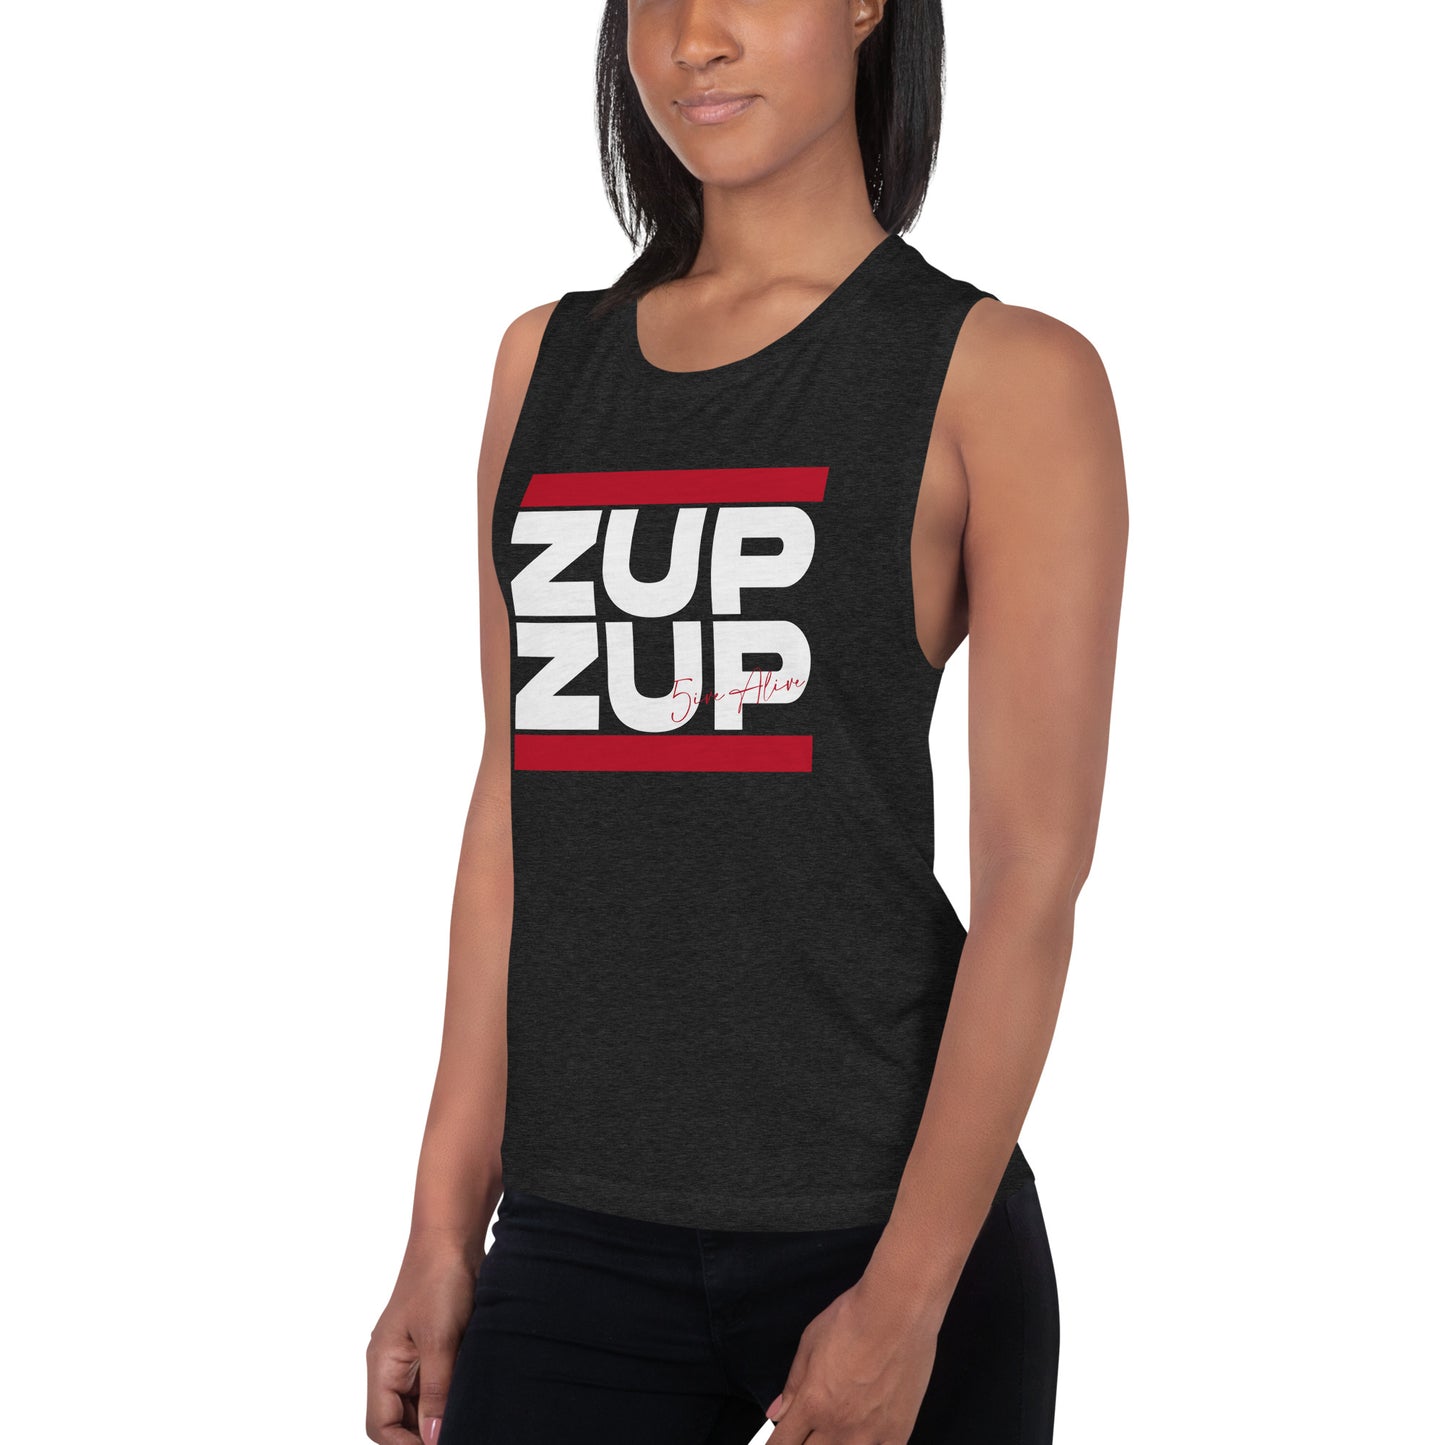 Zup Zup (White Text) Ladies’ Muscle Tank